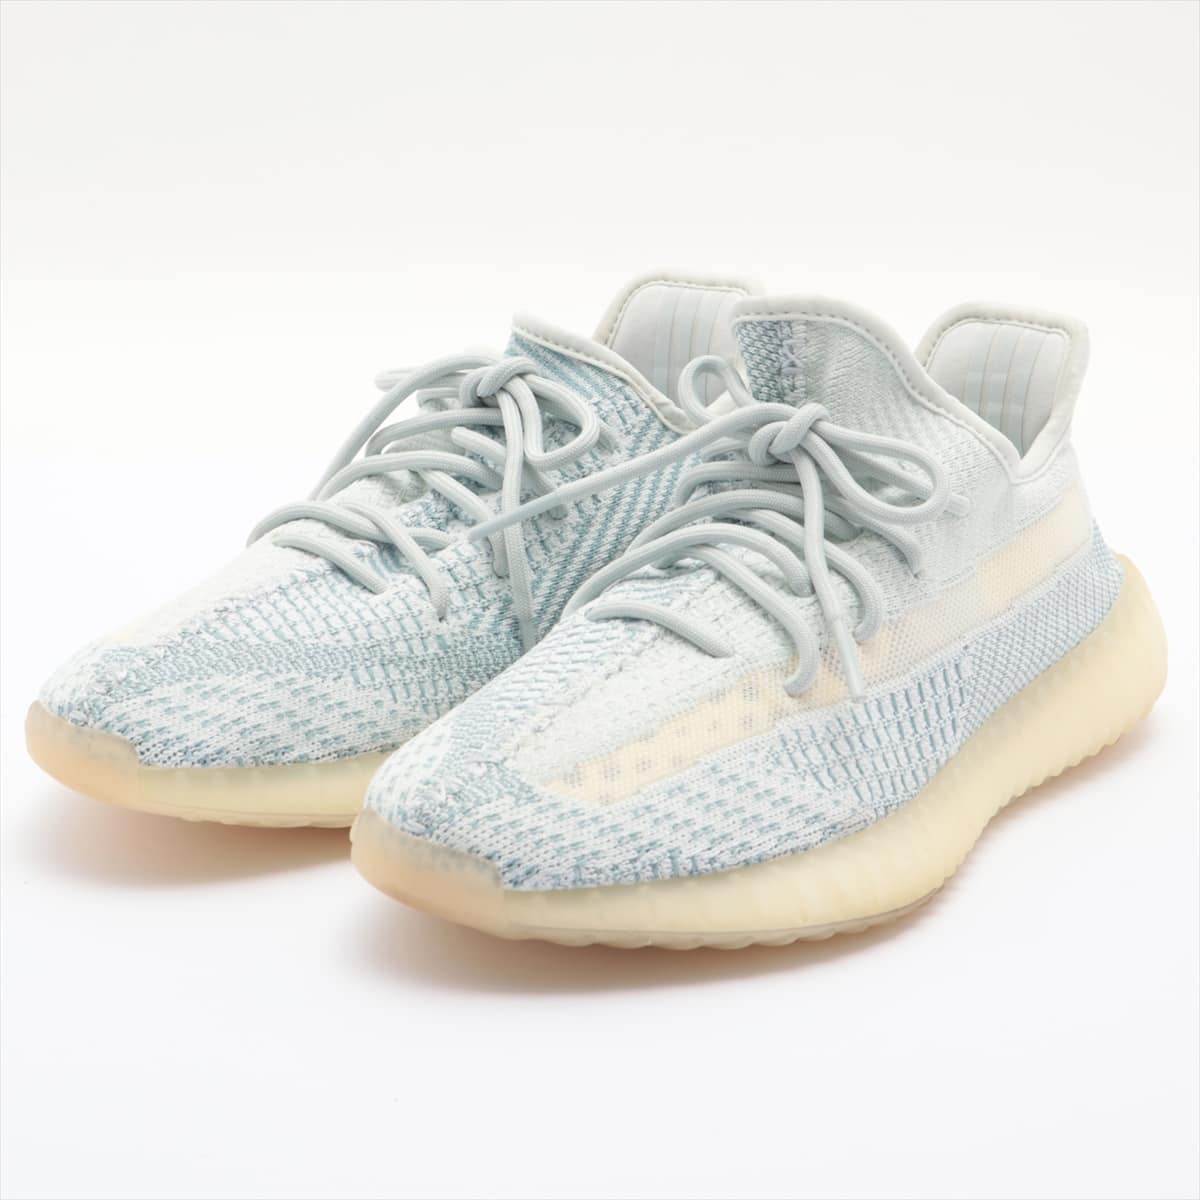 Adidas YEEZY BOOST 350 V2 2019 Fabric Sneakers 27.0cm Men's White CLOUD WHITE FW3043